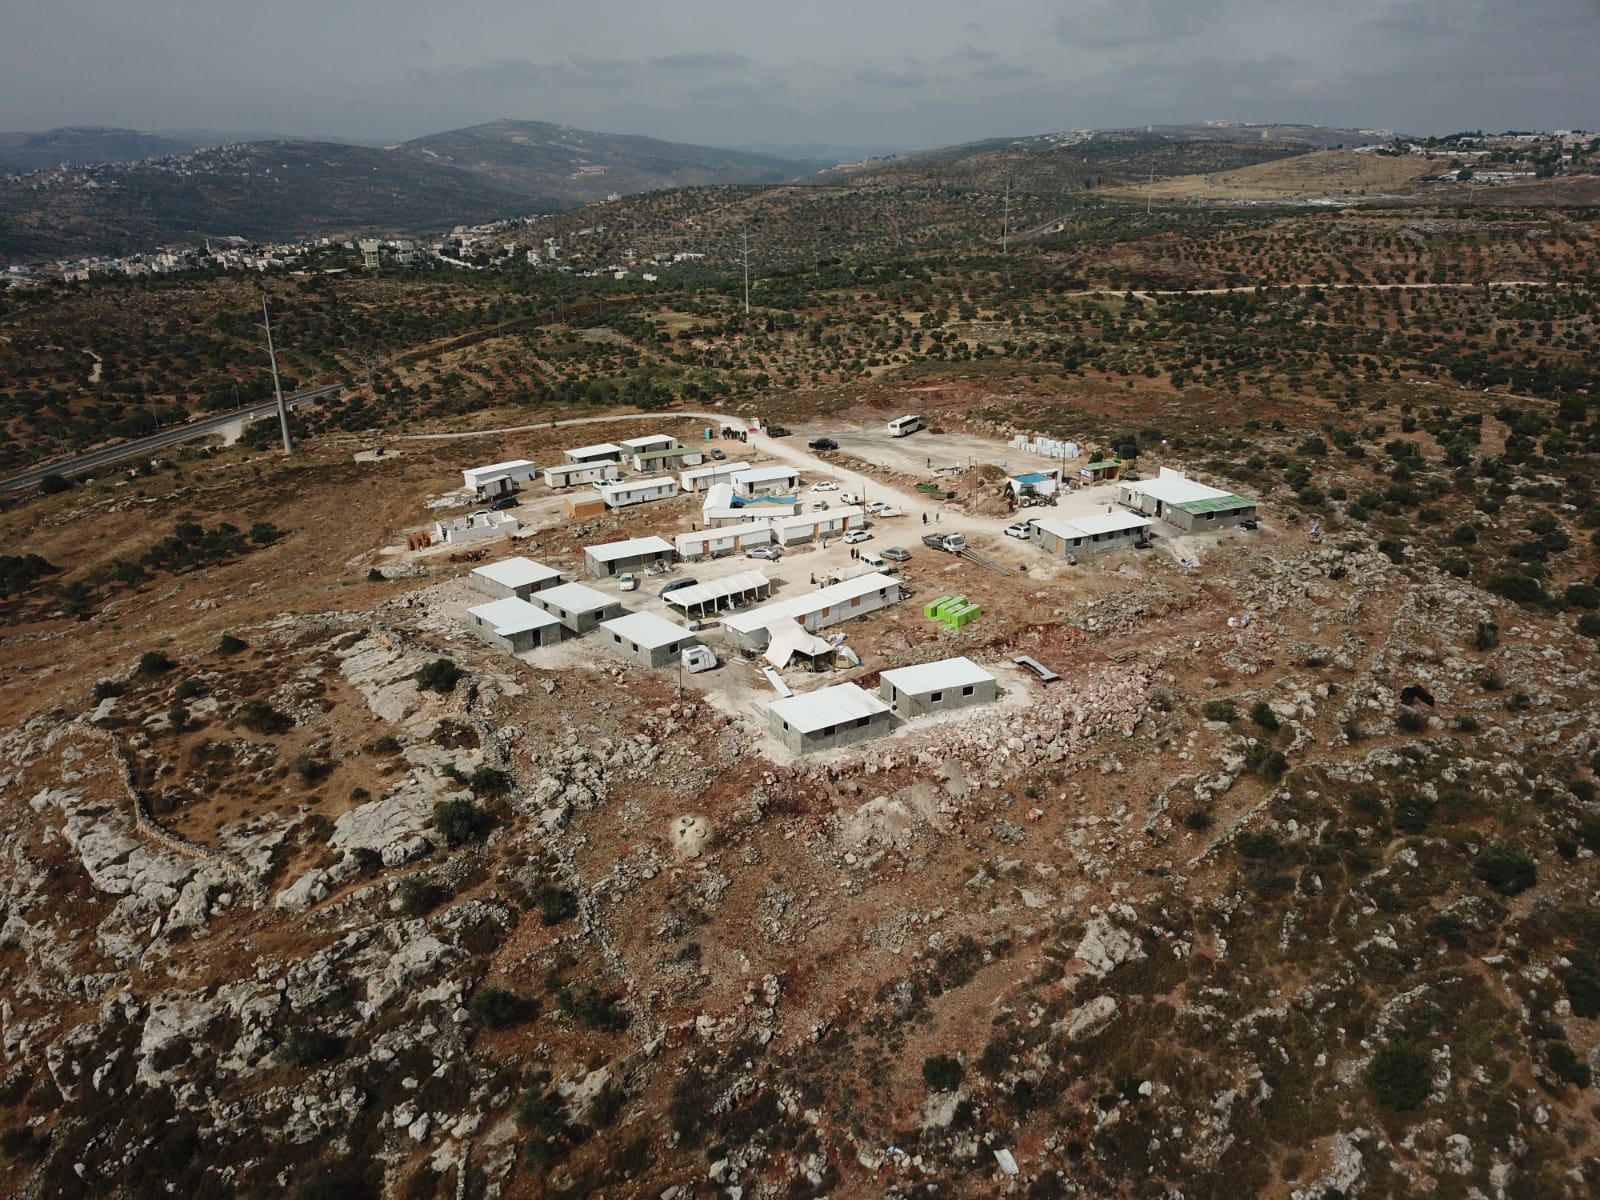 A surprising admission by a Zionist minister regarding settlement construction on Palestinian lands